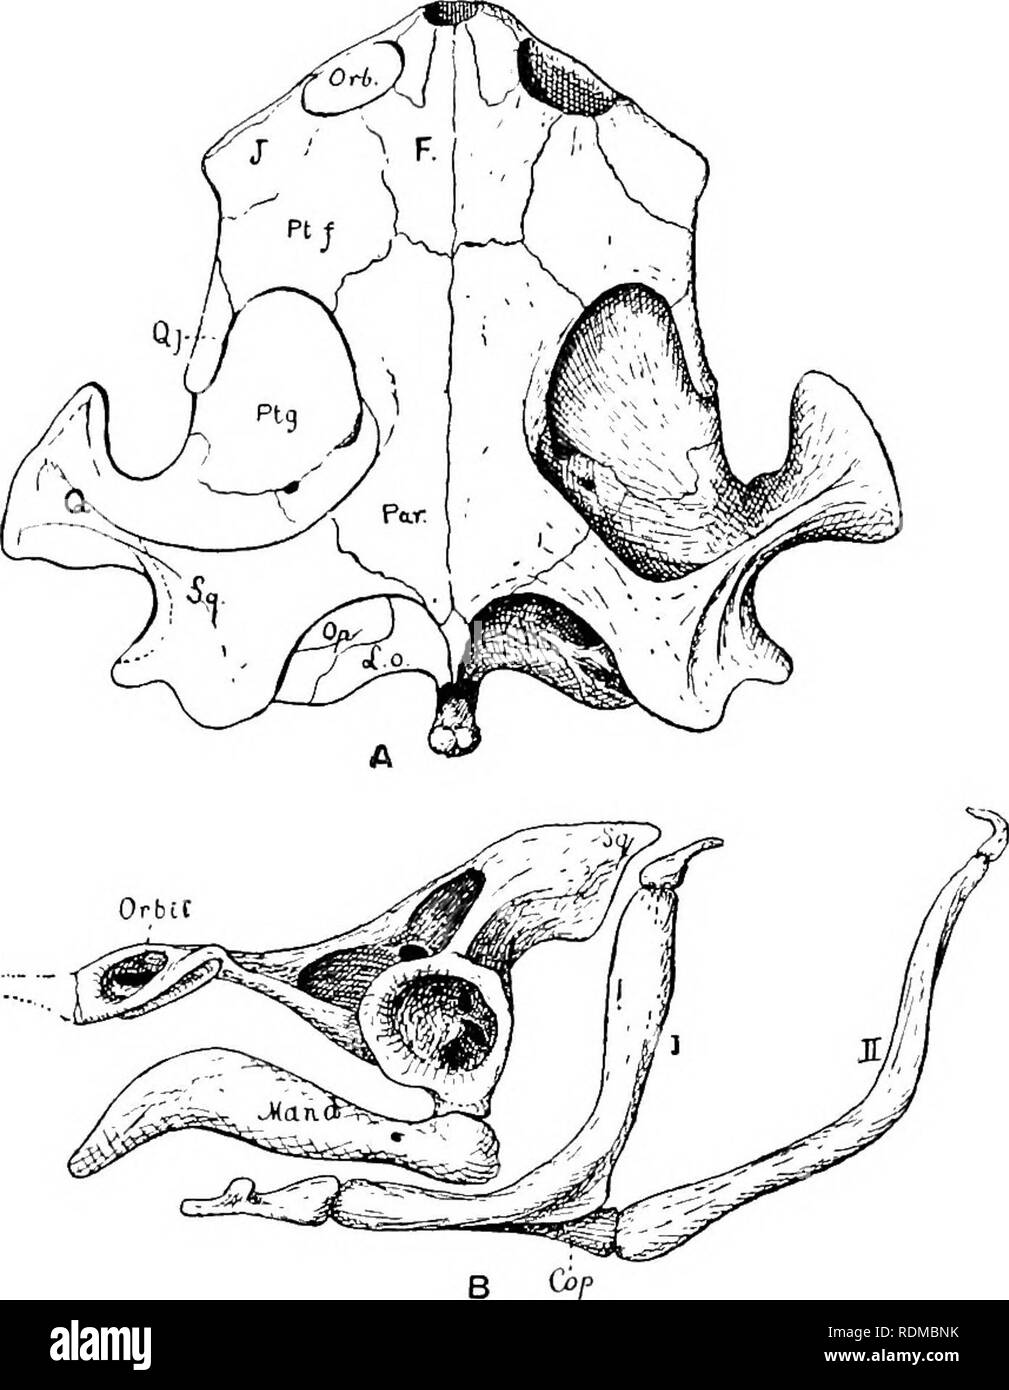 . The Cambridge natural history. Zoology. 400 CHELONIA by the froiitals. The fifth and eighth cervical vertebrae are biconvex. This family, still represented by nearly thirty species, which are divided into eight genera, is restricted to Notogaea, namely. South America and Australia. Chelys finibriata, the ' Matamata,&quot; the only species of this. Fig. 87.—Skull of Ohdysfimbriata. x 1. A, Dorsal view of skull; B, side view of skull aud hyoid apparatus. Cop, copular piece ; F, frontal ; J, jugal; L.o, lateral occipital; Maud, mandible ; Op, opisthotic ; Orb, orbit; Par, parietal; Ptf, post- f Stock Photo